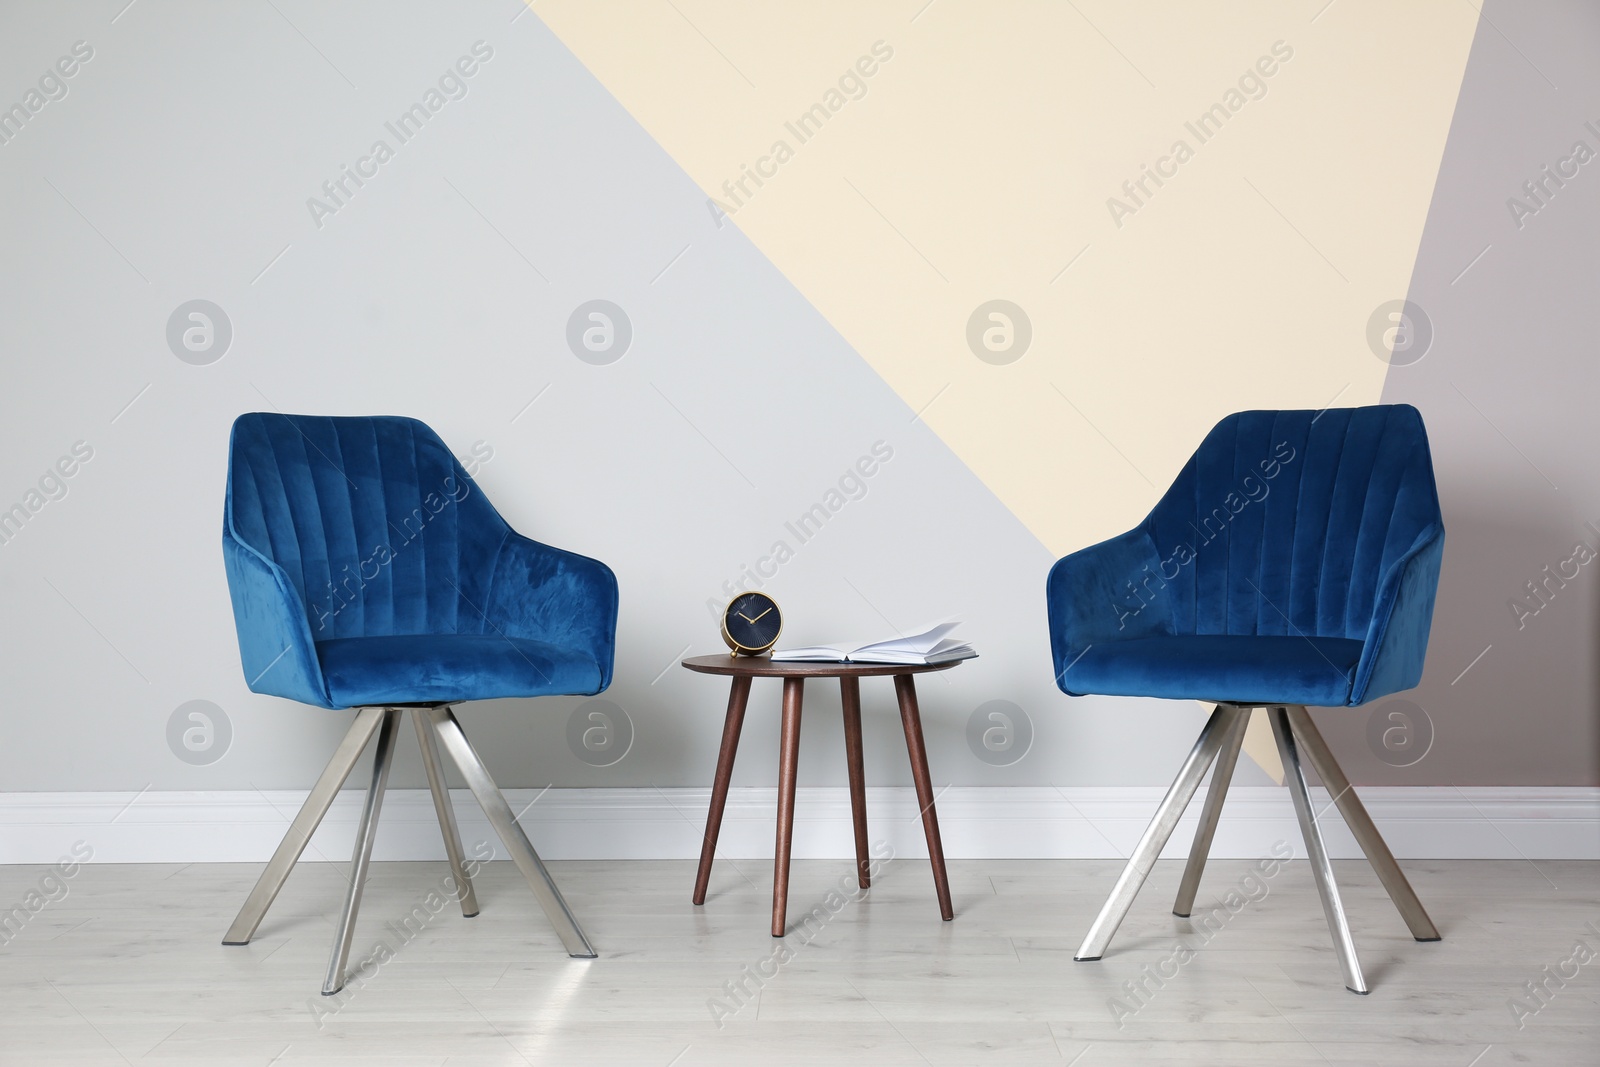 Photo of Room interior with modern blue chairs and table at color wall